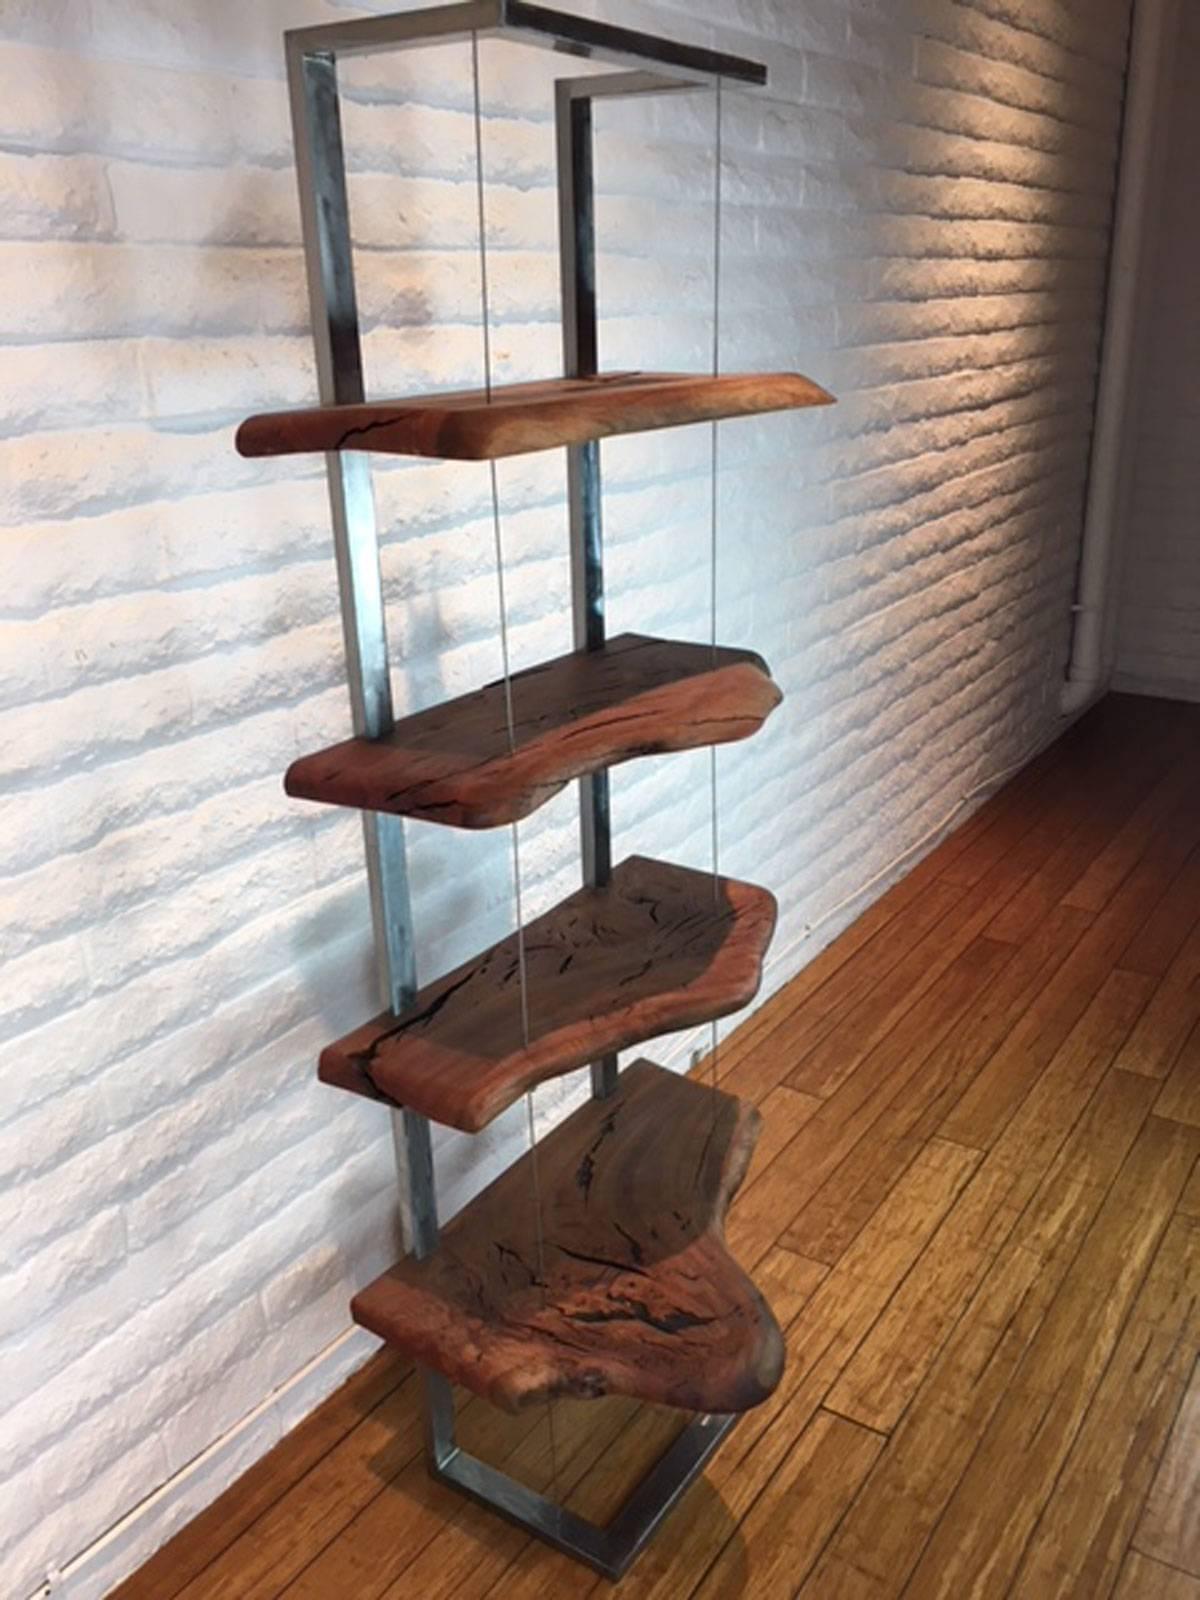 Pleasant presentation of a steel and eucalyptus wood book case or display stand designed, produced and made by master wood artist and designer Scott Mills who only uses reclaimed (deadfall or storm downed trees) in the pieces he designs and